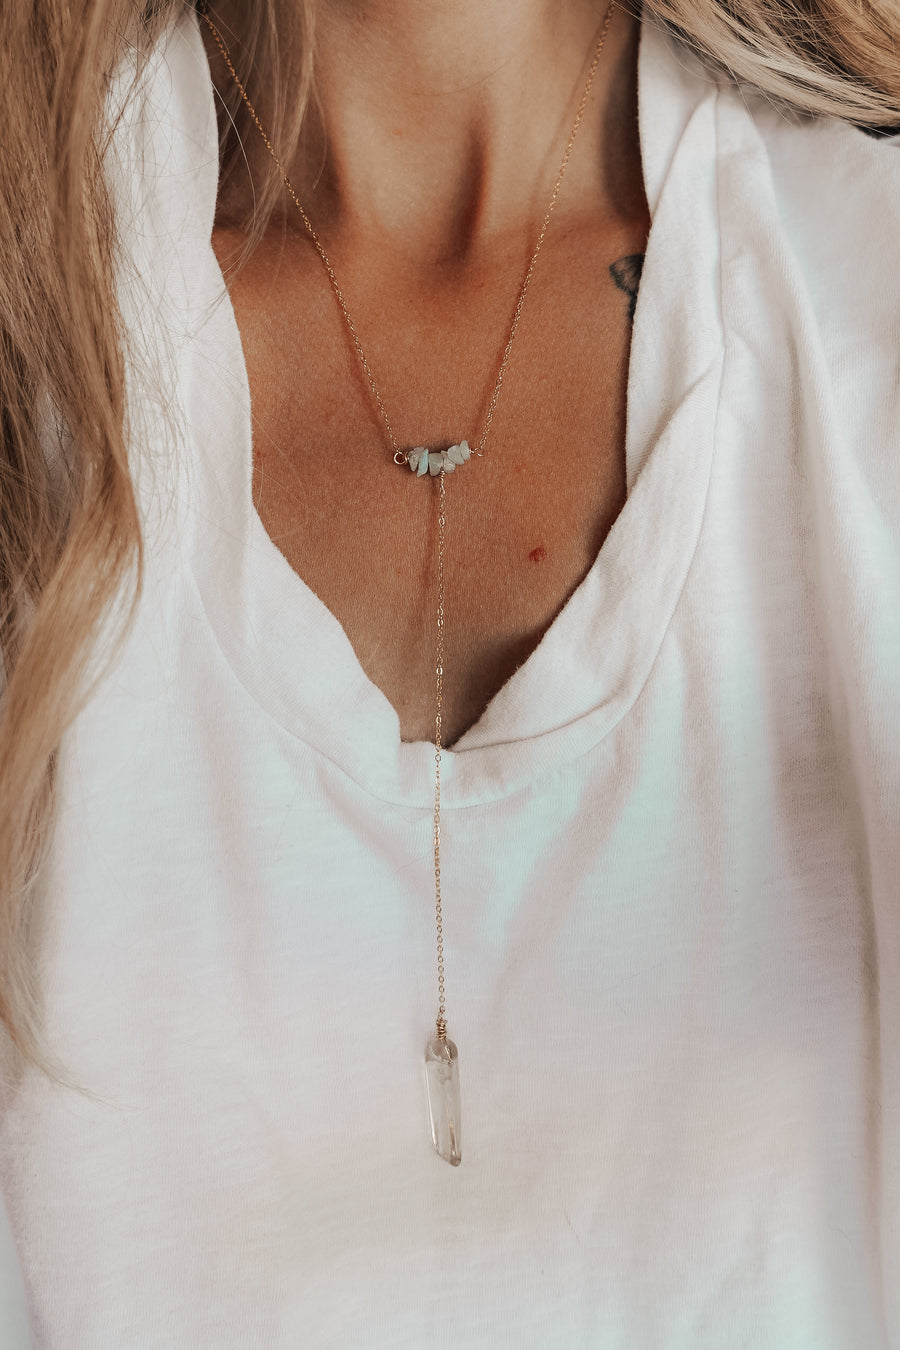 The Free Fall Lariat Necklace with Clear Crystal Quartz & Aquamarine